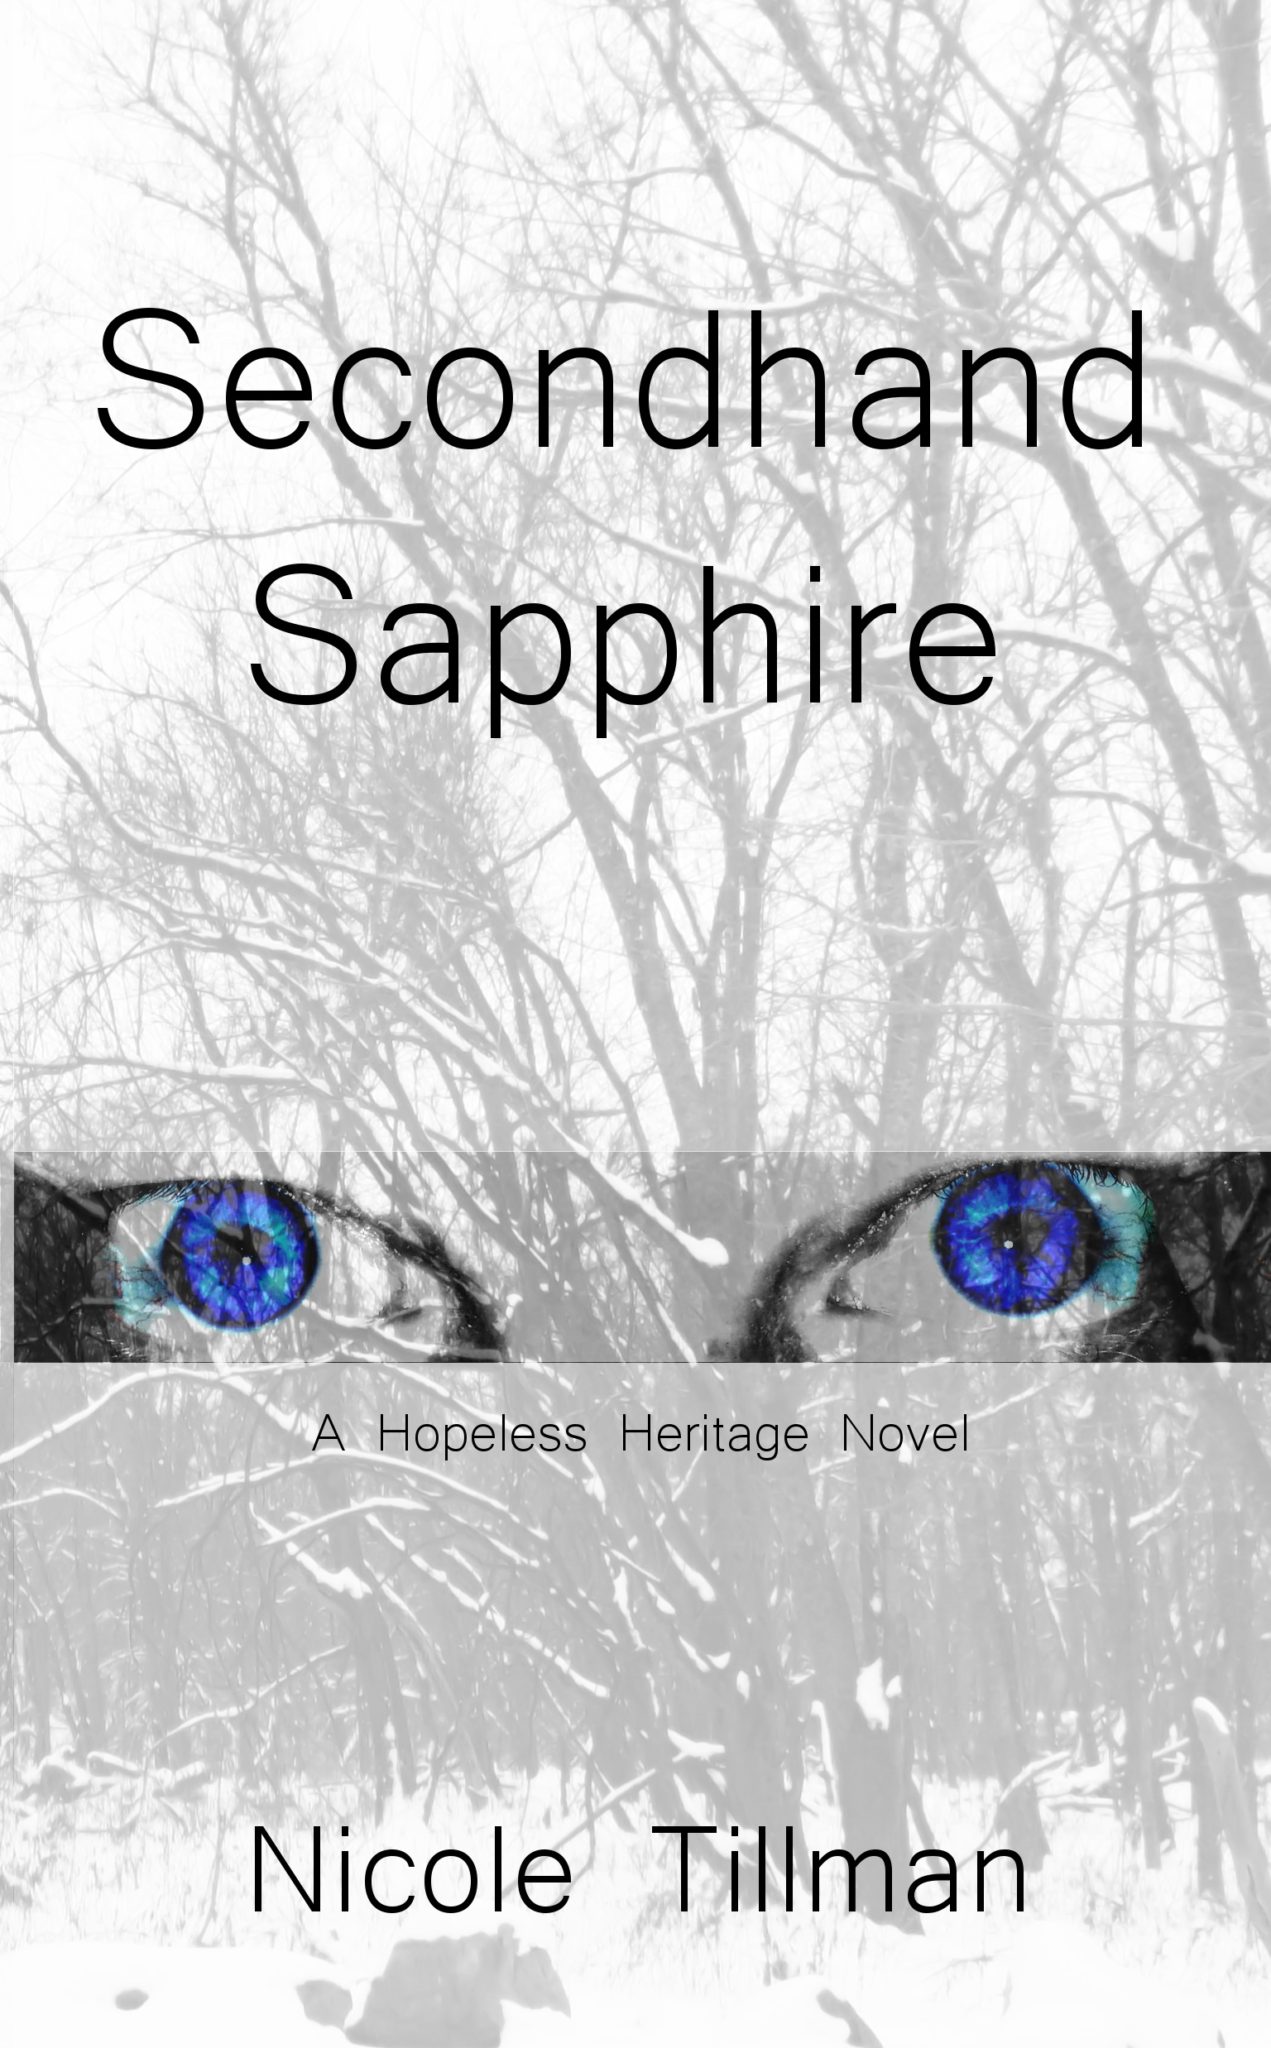 Secondhand Sapphire by Nicole Tillman